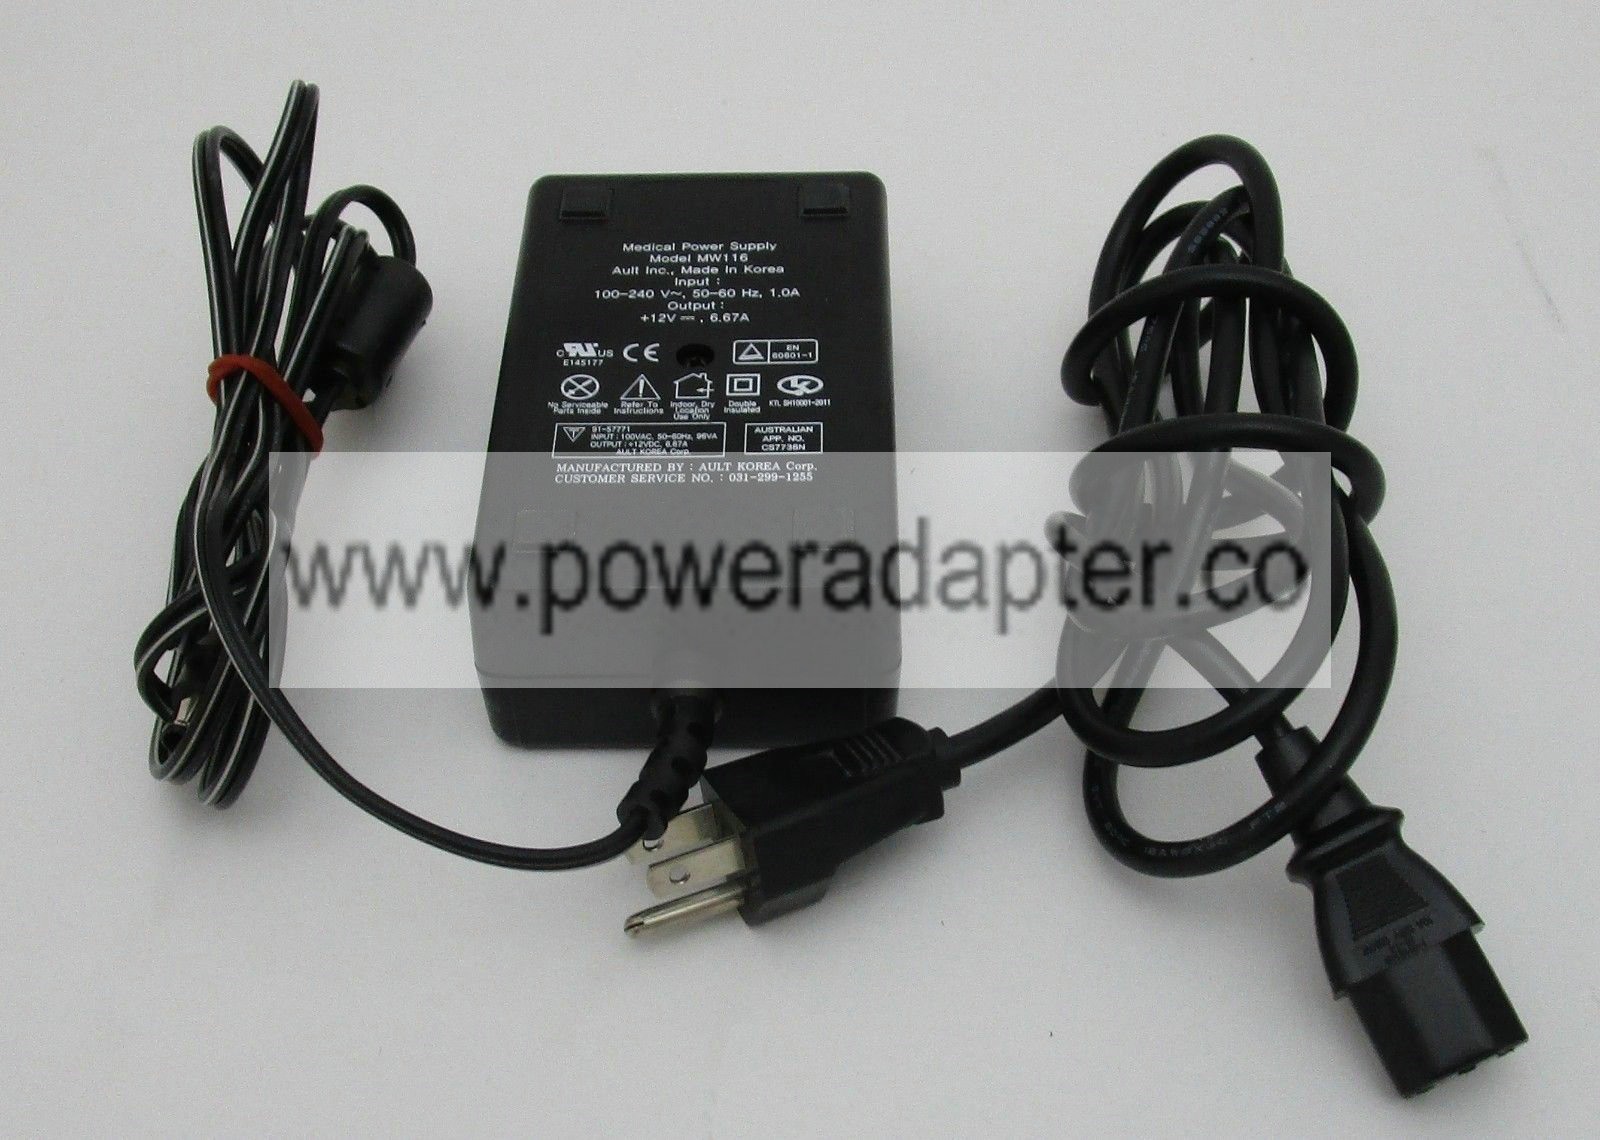 New Ault 12V 6.67A Medical Power Supply AC Power Adapter MW116 Type: AC/Standard Modified Item: No MPN: MW116 Custom - Click Image to Close